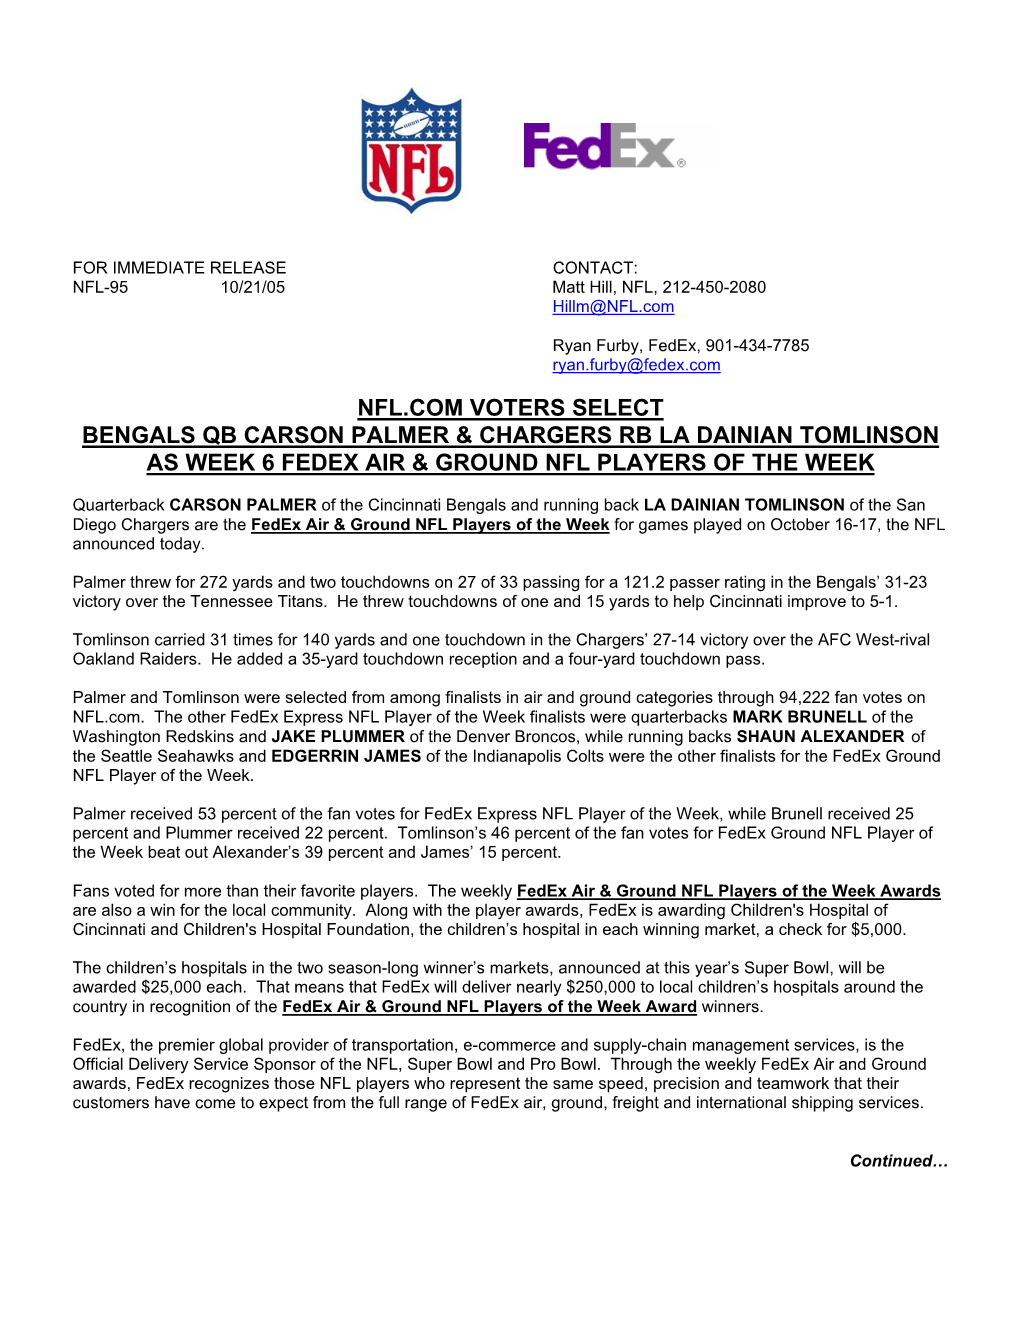 Nfl.Com Voters Select Bengals Qb Carson Palmer & Chargers Rb La Dainian Tomlinson As Week 6 Fedex Air & Ground Nfl Players of the Week